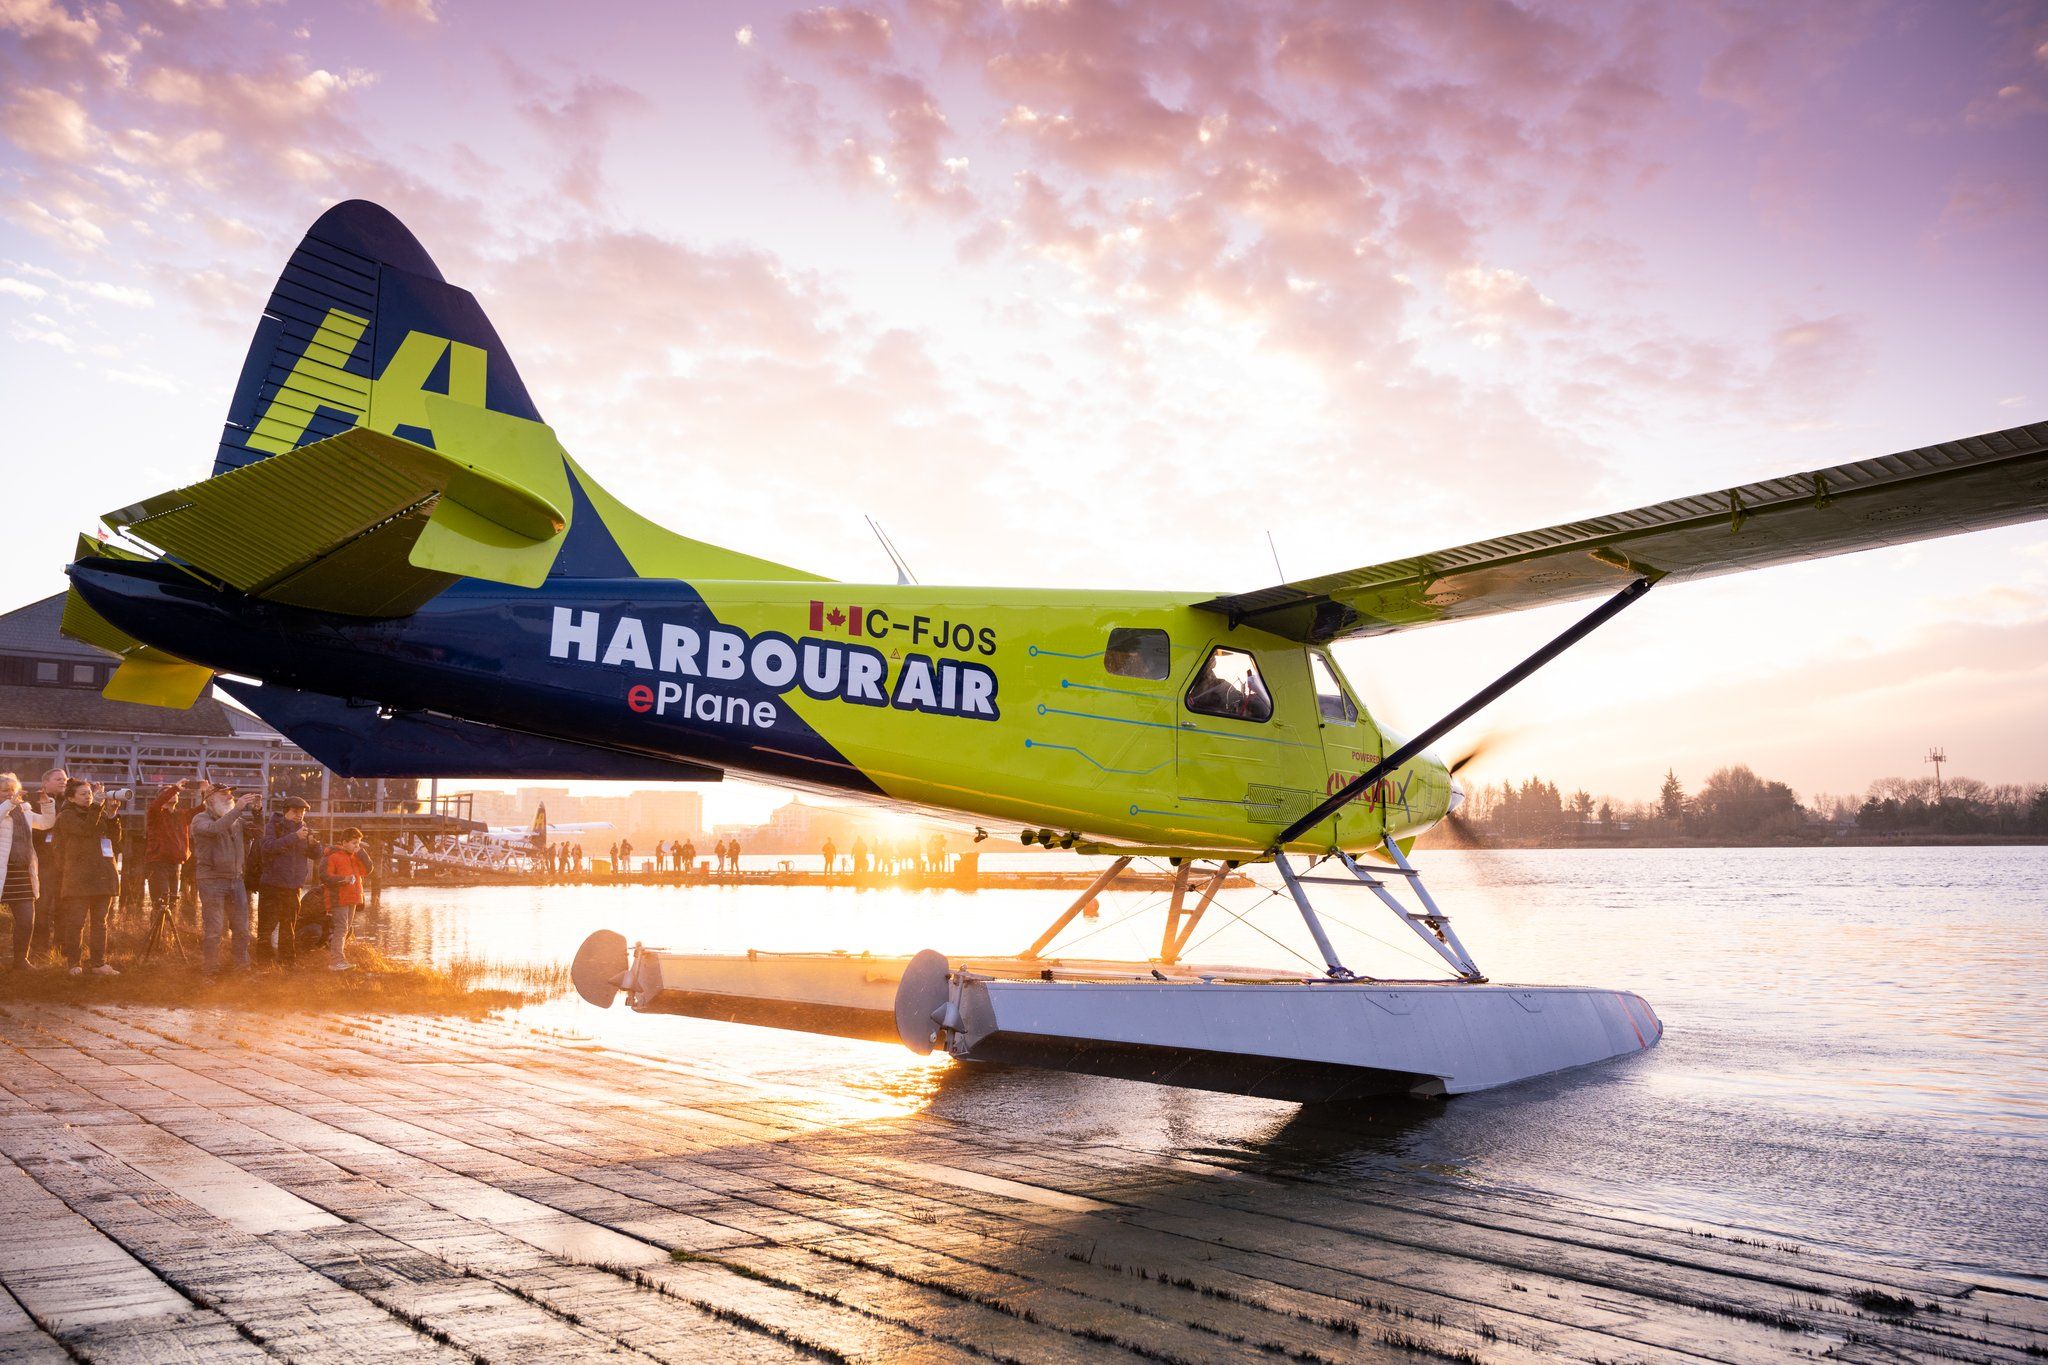 Harbour Air eplane with MagniX